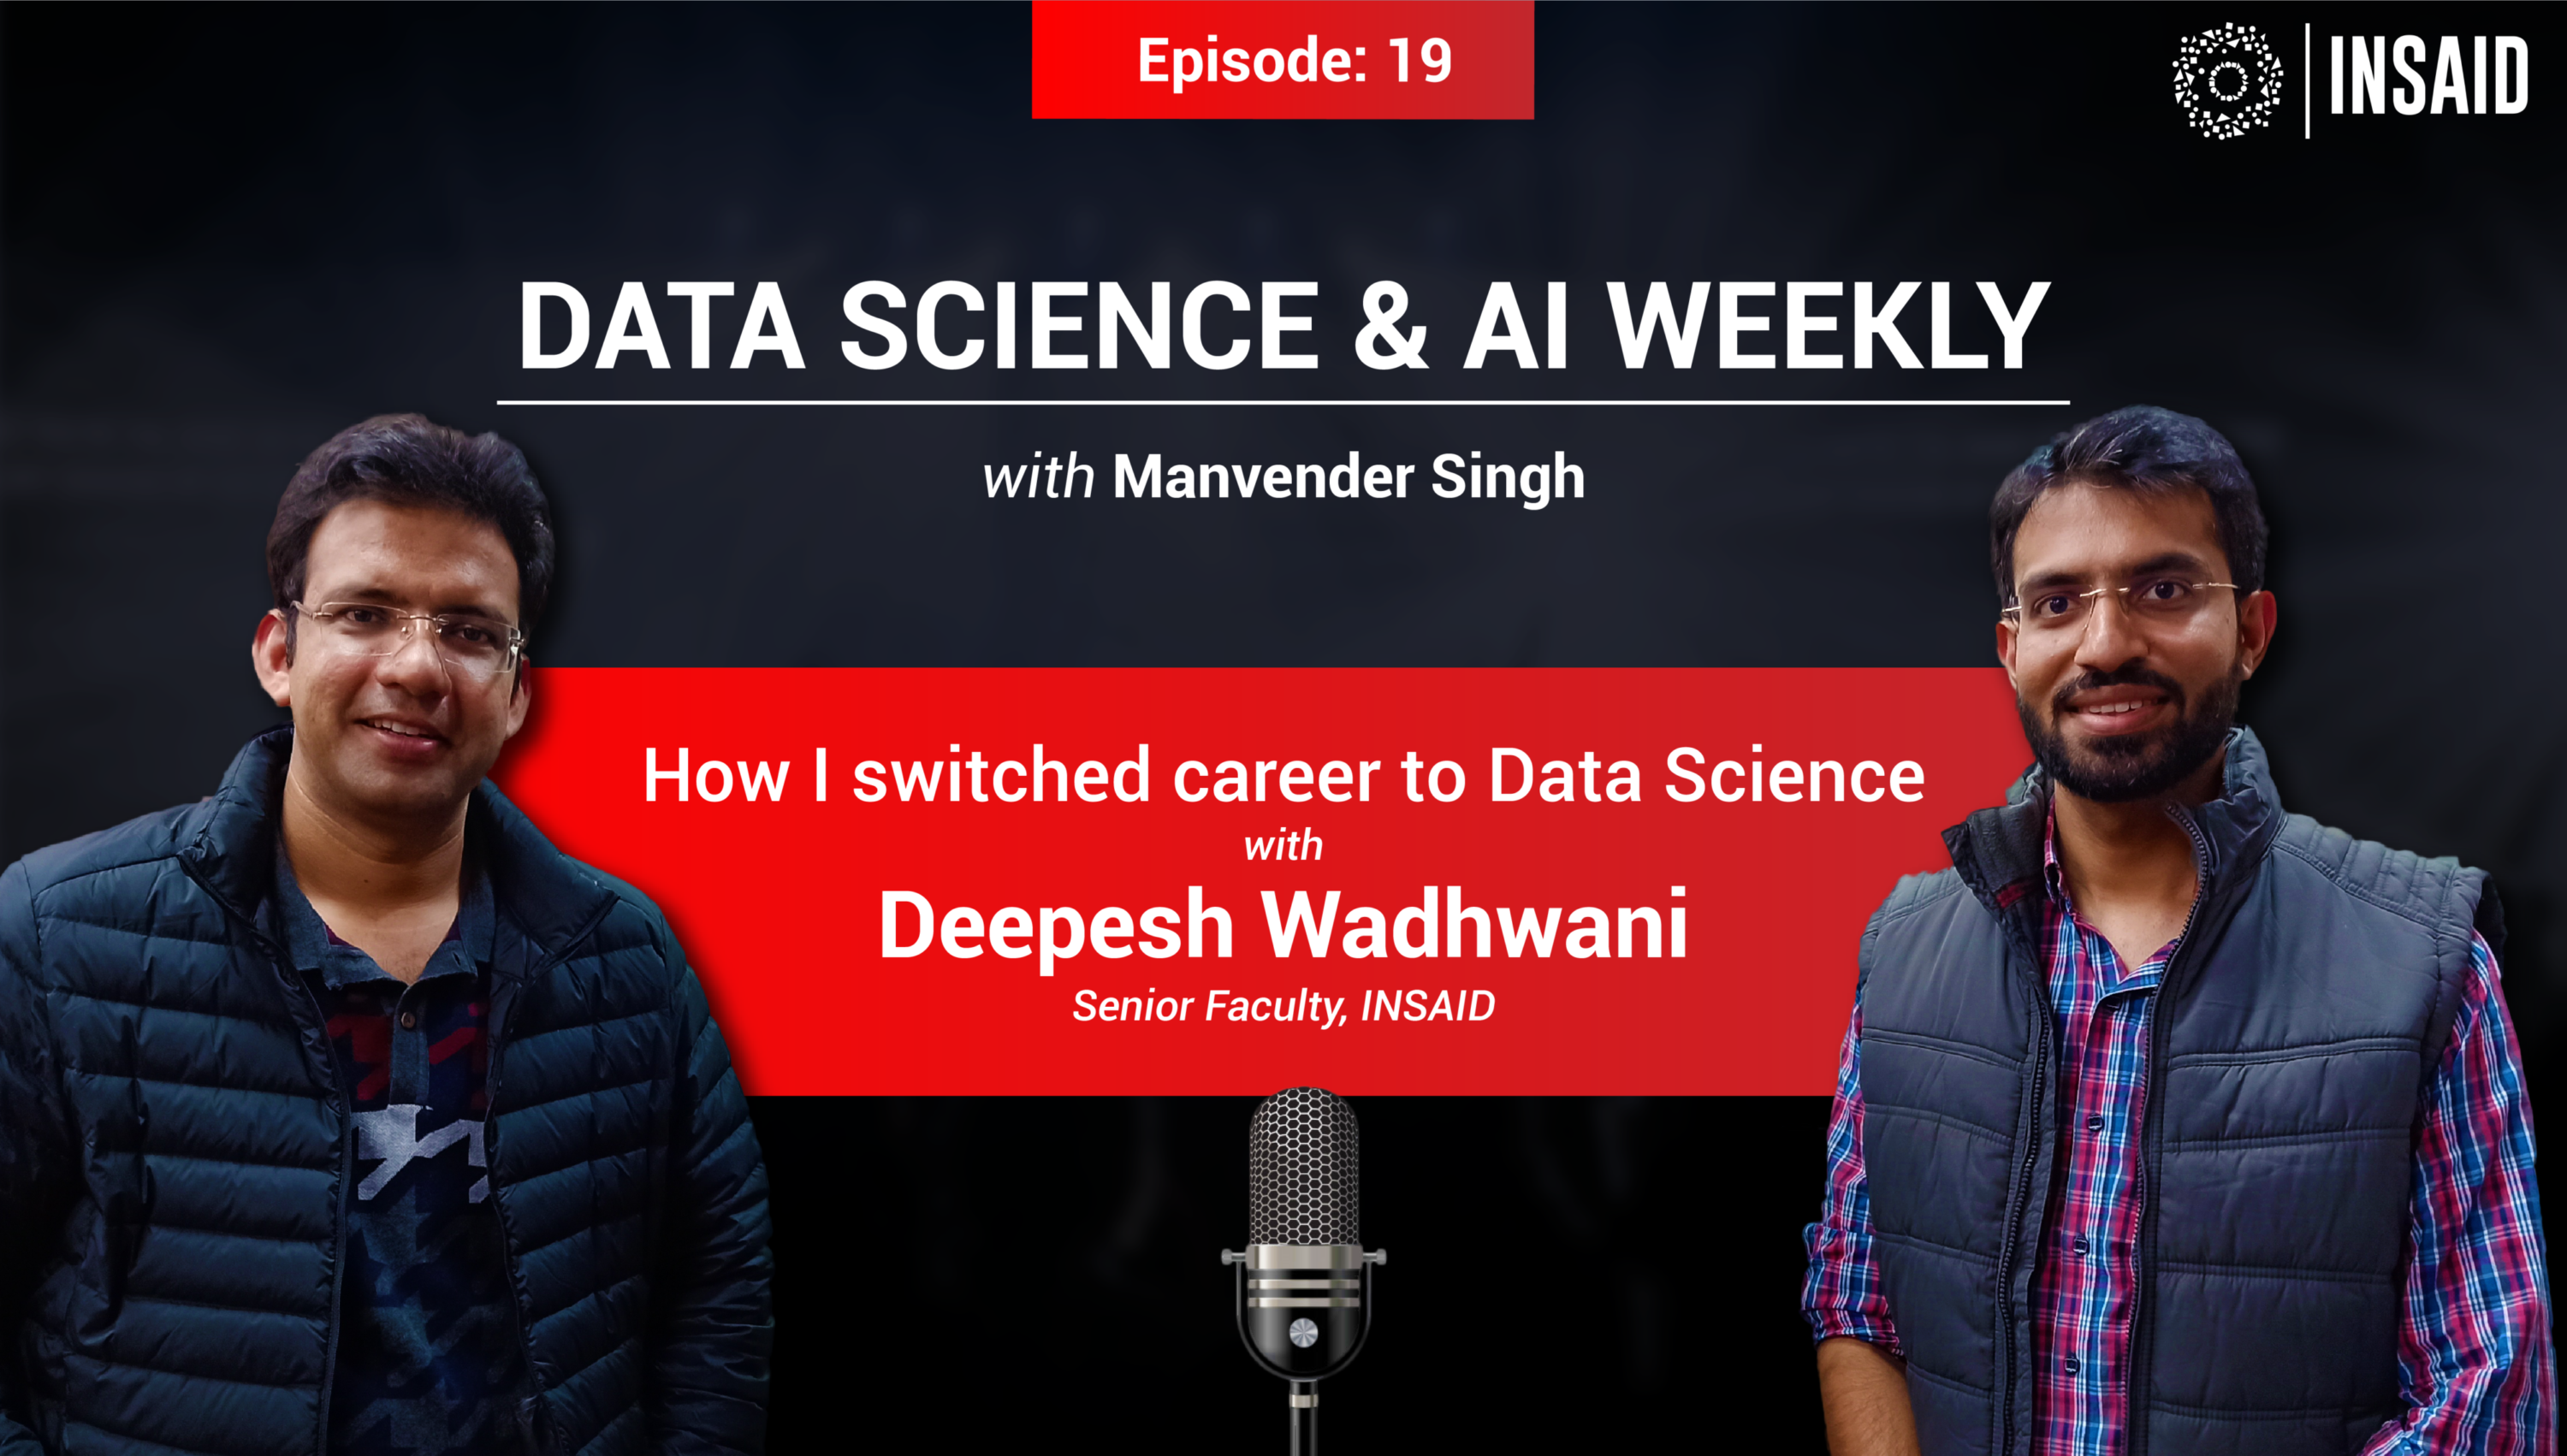 How I switched career to Data Science?